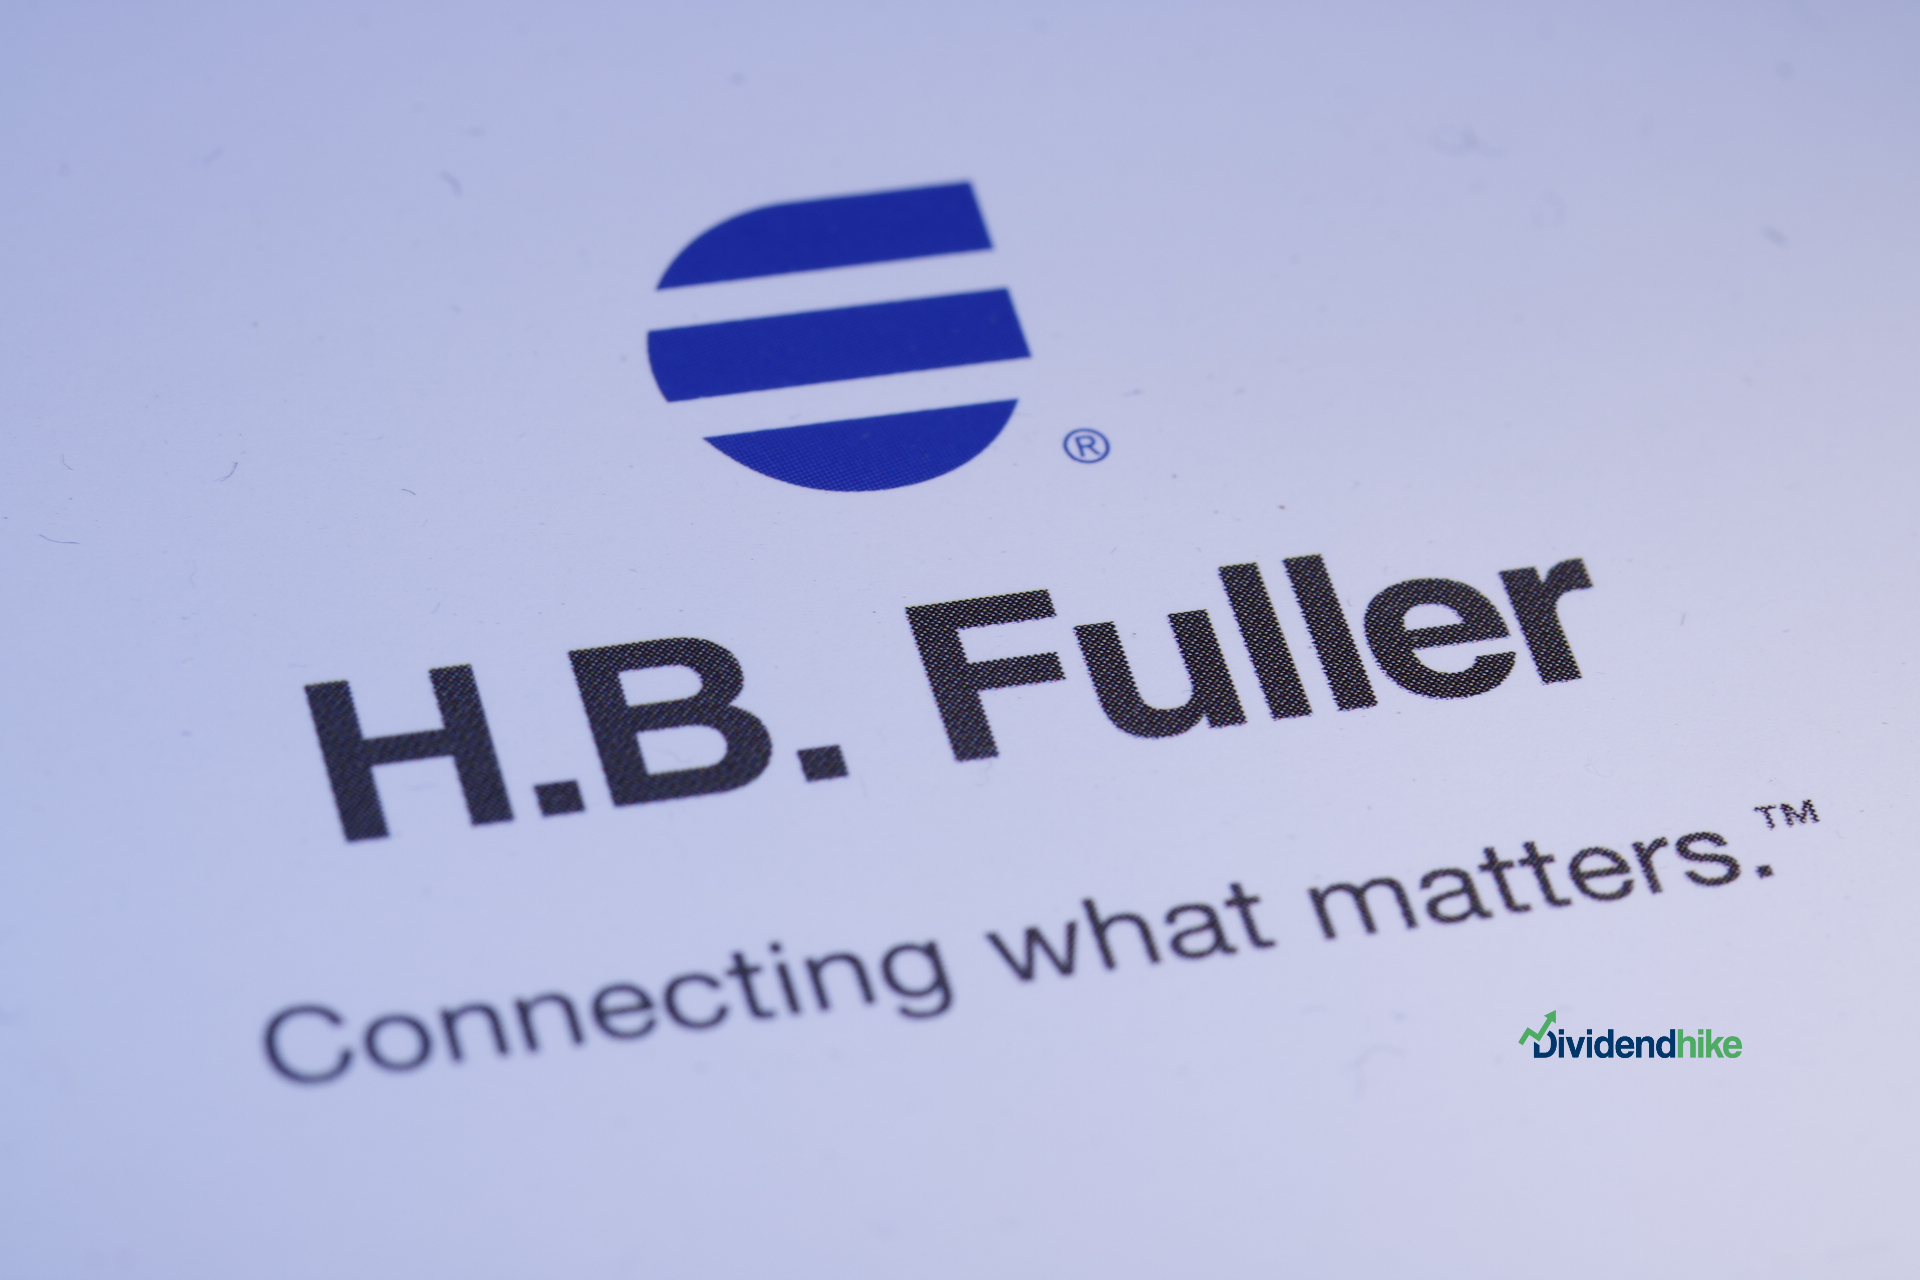 H.B. Fuller has now raised its dividend for 51 consecutive years © dividendhike.com